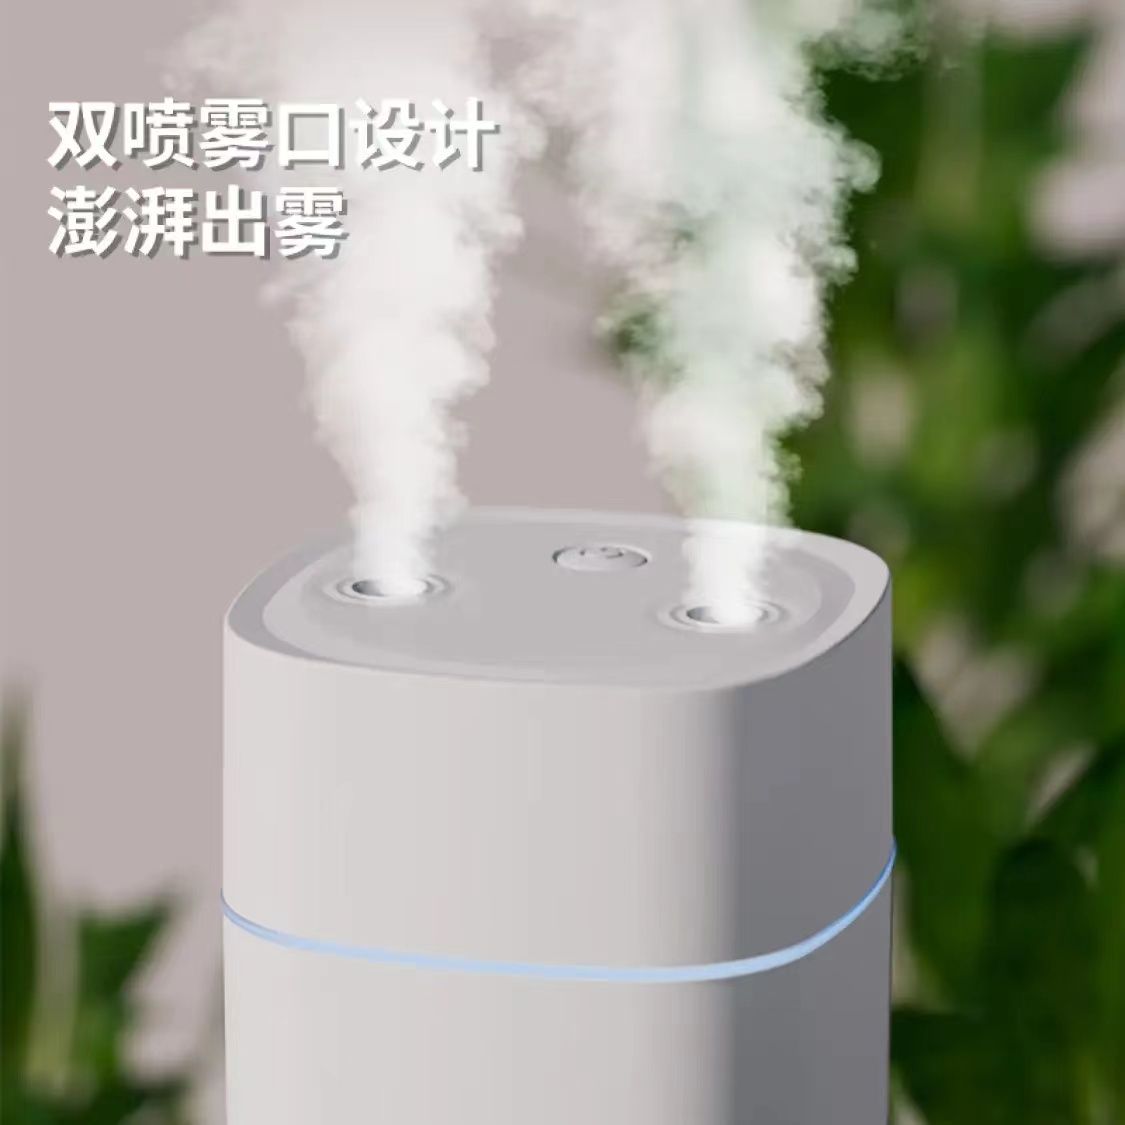 Smart Humidifier Home Mute Large Capacity Bedroom Heavy Fog Office Car Desktop Pregnant Mom and Baby Dedicated